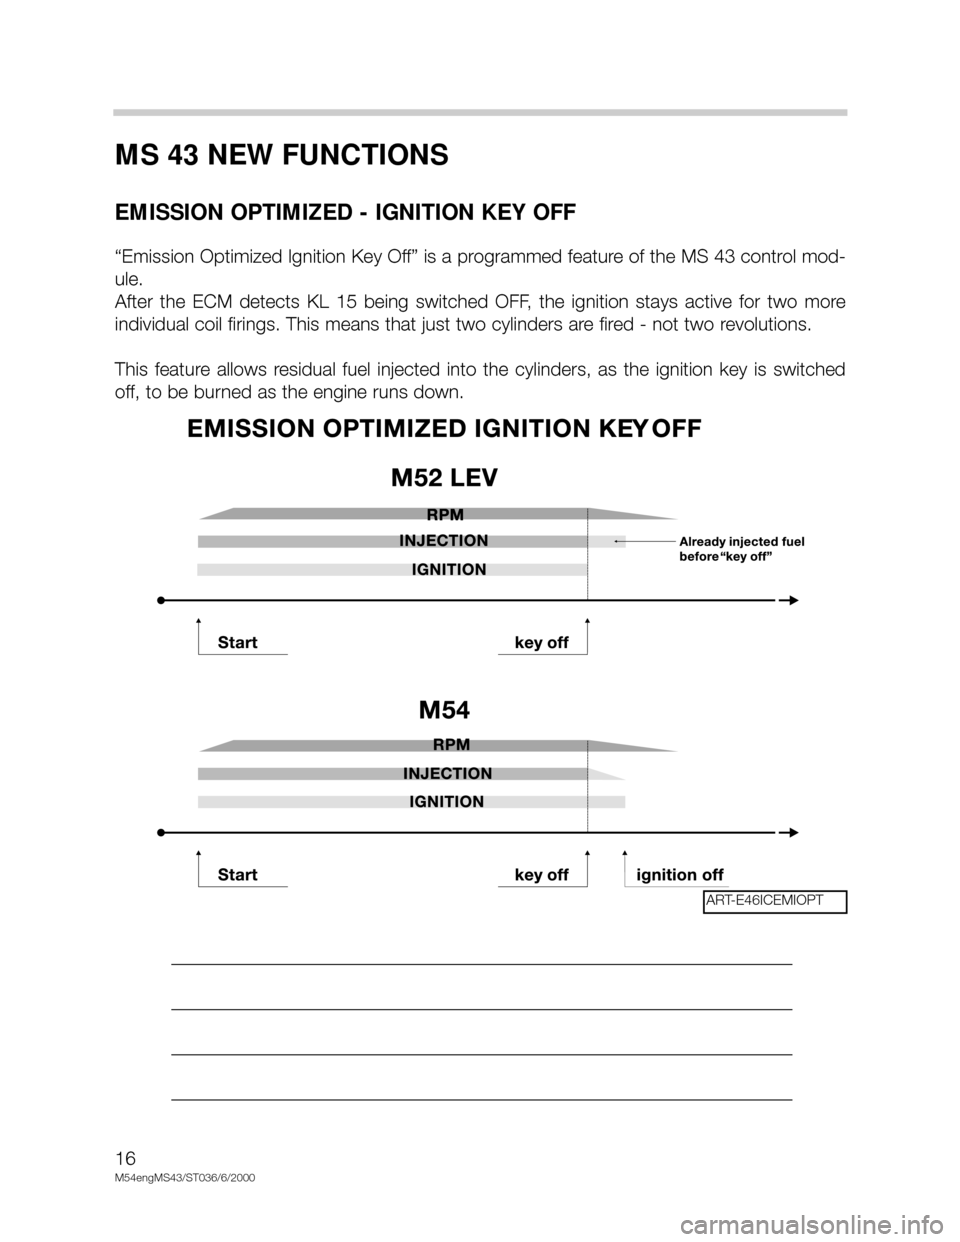 BMW X5 2005 E53 M54 Engine User Guide 16
M54engMS43/ST036/6/2000
MS 43 NEW FUNCTIONS
EMISSION OPTIMIZED - IGNITION KEY OFF
“Emission Optimized Ignition Key Off” is a programmed feature of the MS 43 control mod-
ule. 
After  the  ECM  